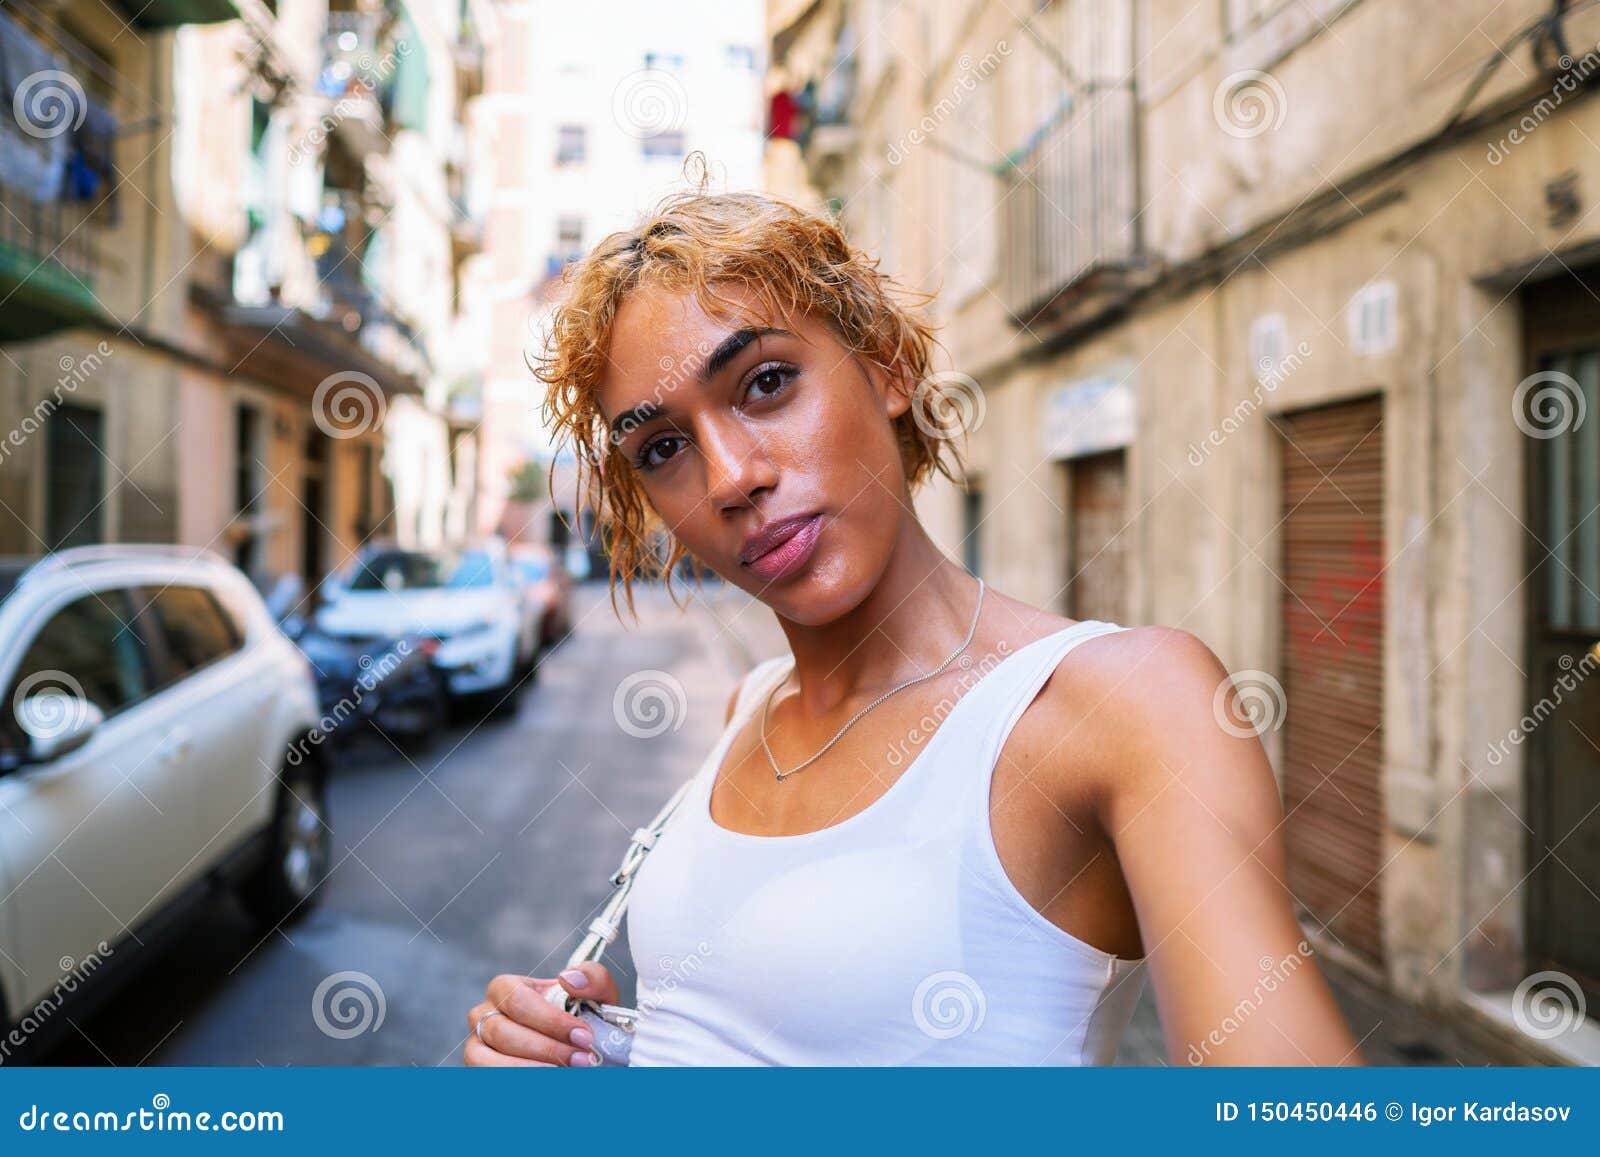 Shemale Woman Posing and Doing Selfie Stock Photo - Image of shemale, slim:  150450446